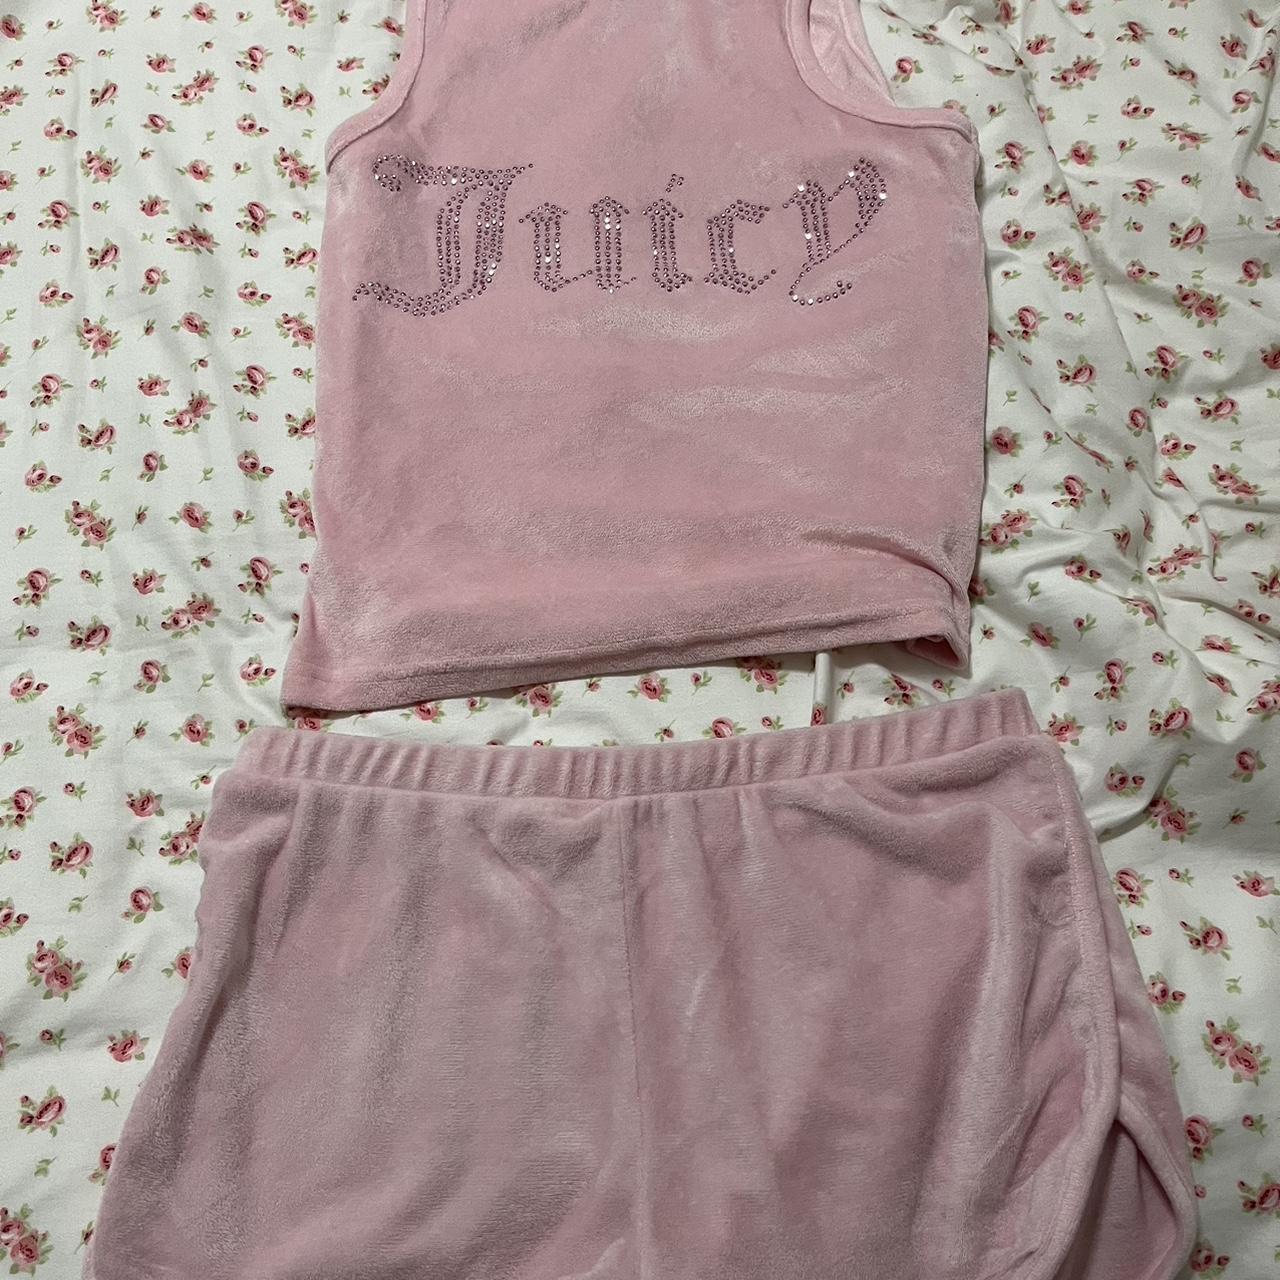 Juicy Couture matching pj set , Super light and